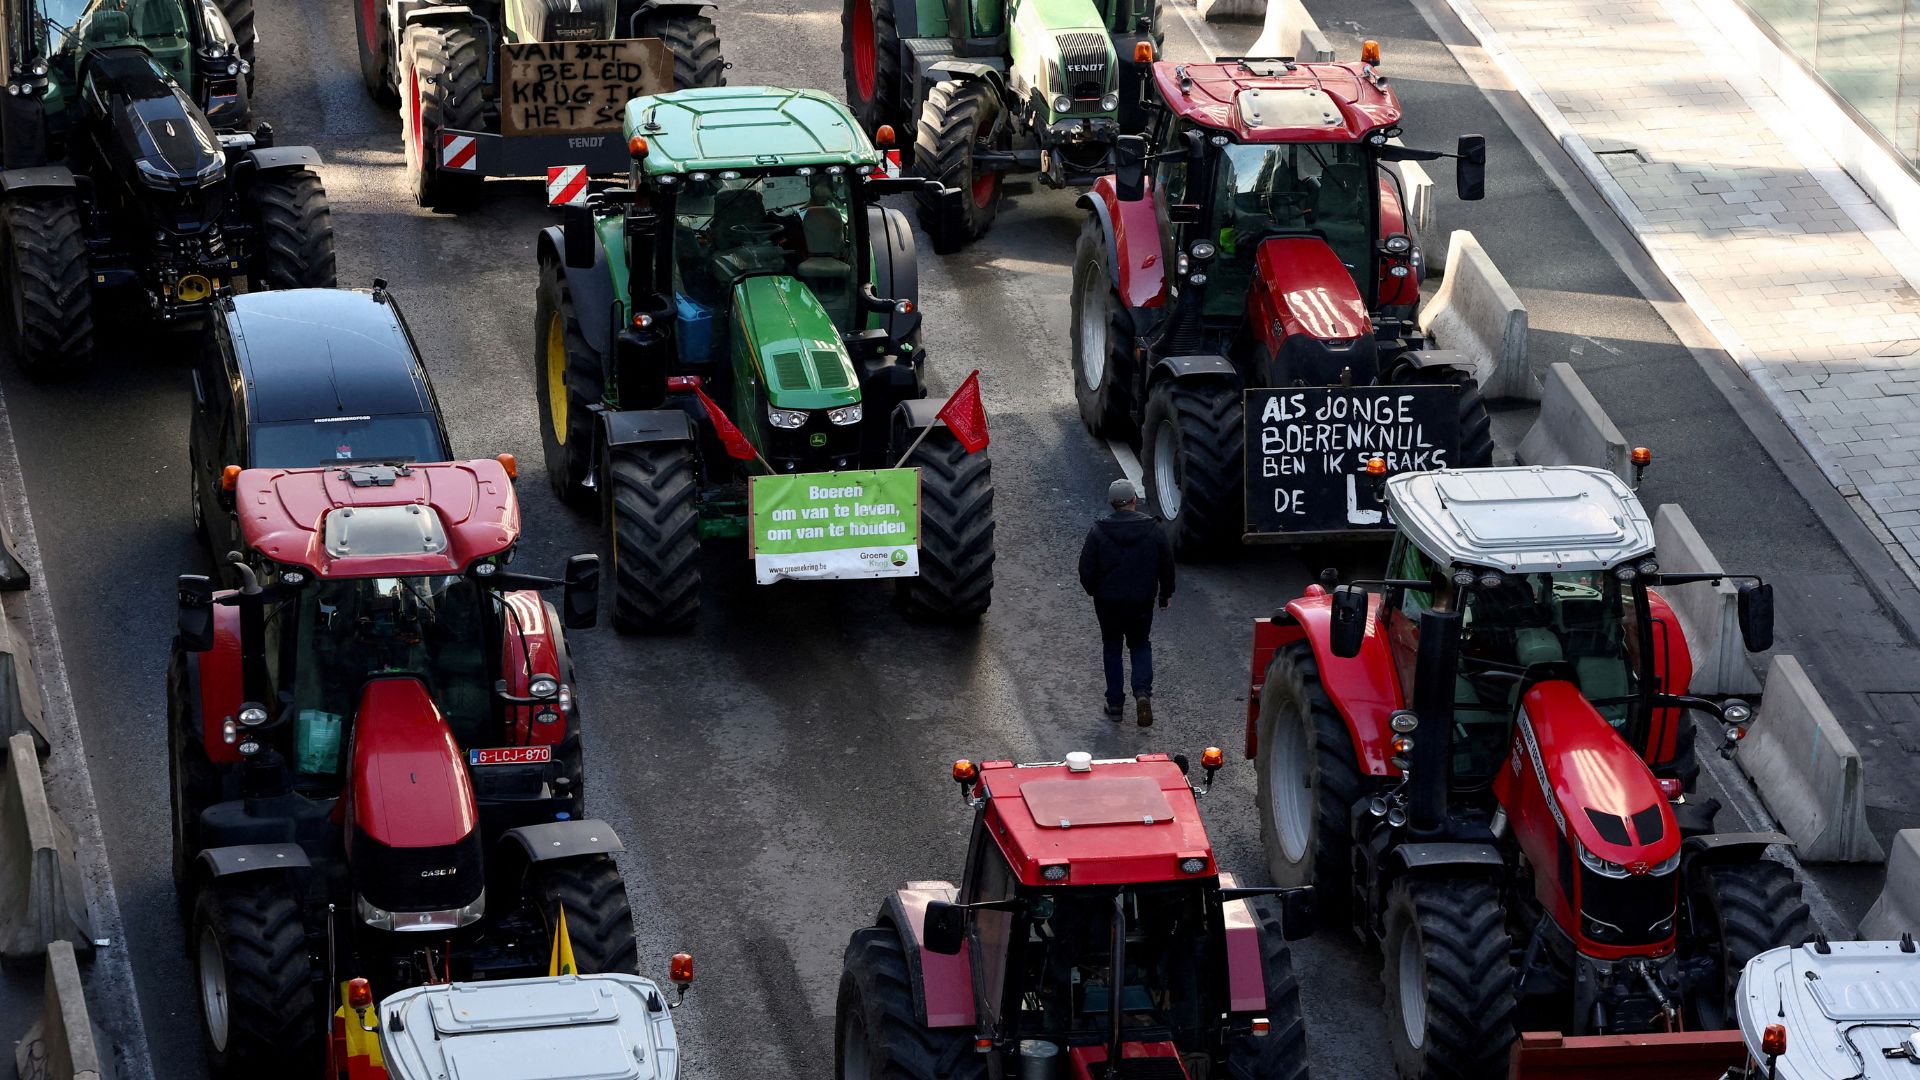 Earlier this month, farmers' tractors blocked roads near the European Parliament in Brussels. /Yves Herman/Reuters